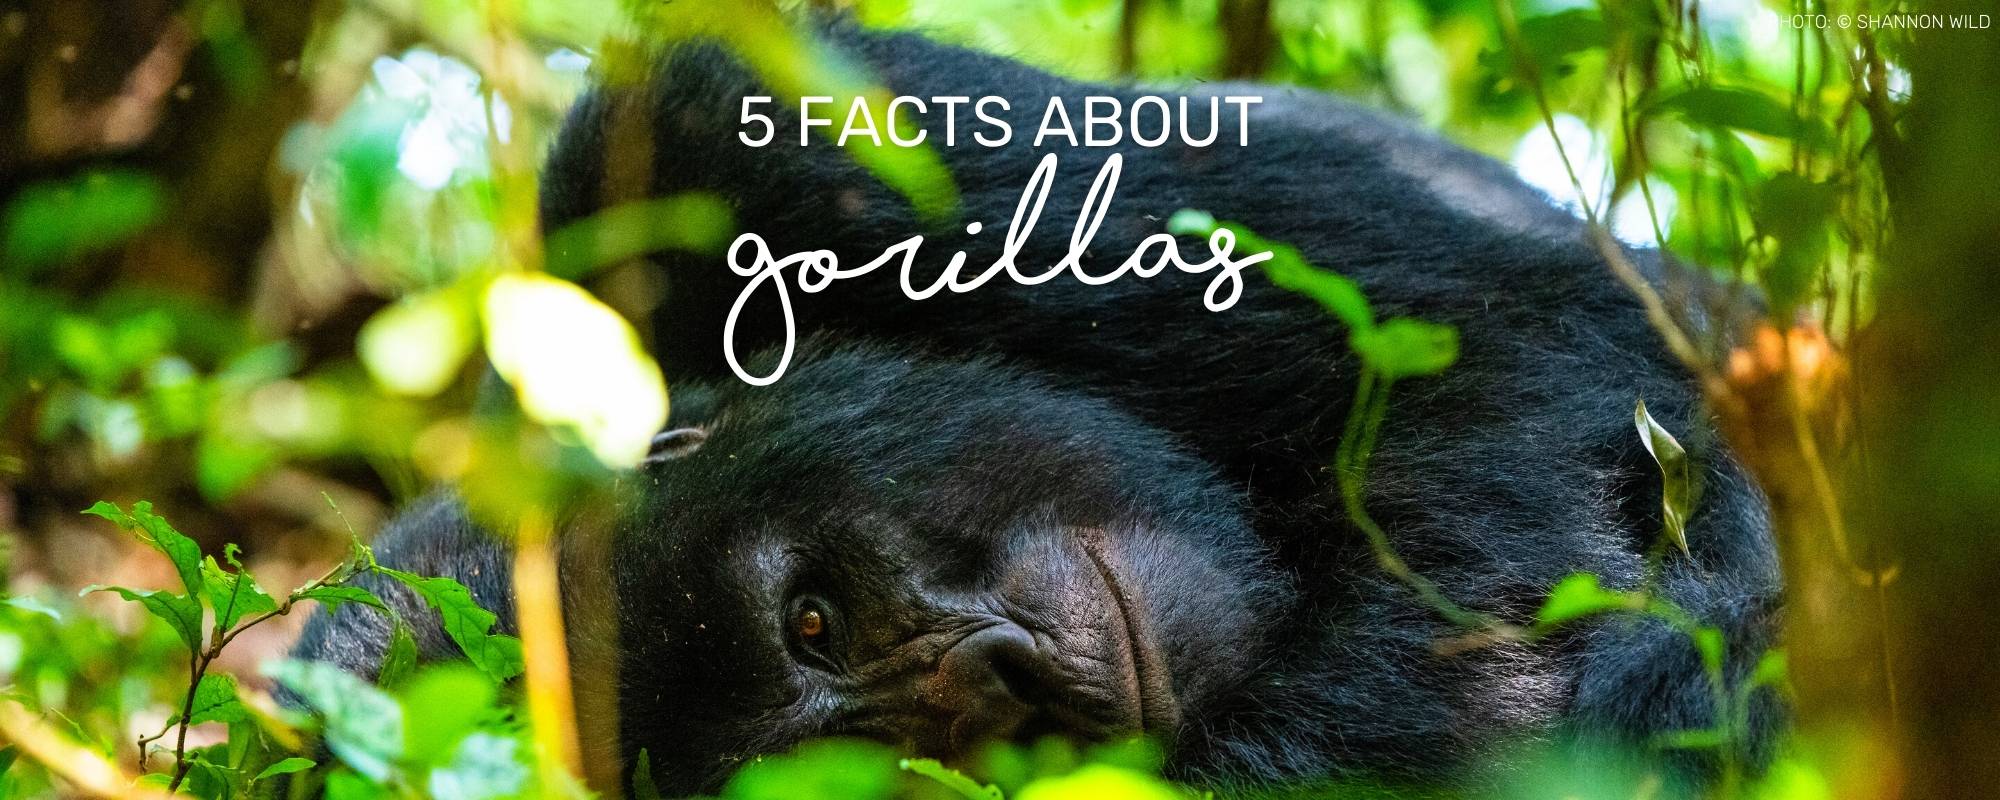 5 FACTS ABOUT MOUNTAIN GORILLAS